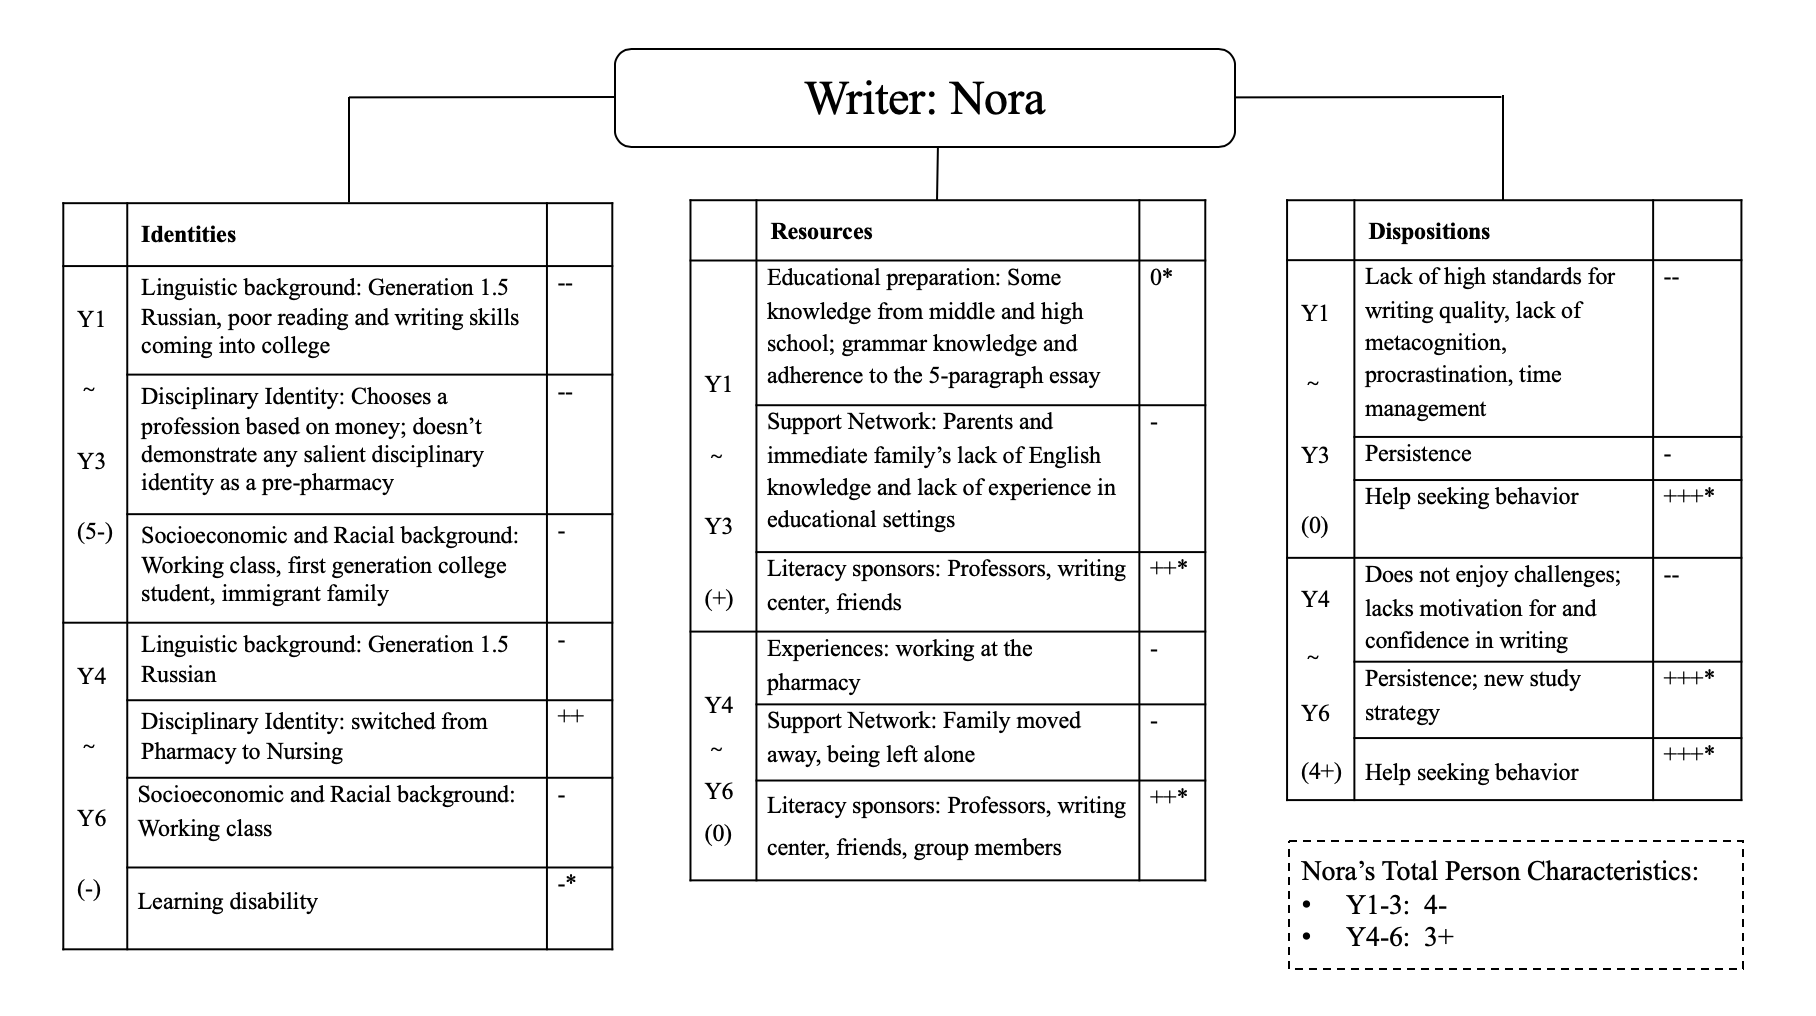 This figure shows an overview of Nora's person characteristics. A rectangle on the top center represents Nora the writer, which is connected with lines to three rectangular boxes beneath it. Each box is a table of Nora's person characteristics with three columns, listing year periods, specific person characteristics, and minuses or pluses. The rectangular box on the left is marked with 'Identities,' under which Nora's identities are listed within two three-year periods of time. The period of Year 1 to Year 3 is marked with five minuses and corresponds to three sets of identities, including 'Linguistic background: Generation 1.5, Russian, poor reading and writing skills coming into college' with two minuses; 'Disciplinary Identity: Choose a profession based on money, doesn't demonstrate any salient disciplinary identity as a pre-pharmacy' with two minuses; 'Socioeconomic and Racial background: Working class, first generation college student, immigrant family' with one minus. Then, the period of Year 4 to Year 6 is marked with one minus and corresponds to four sets of identities, including 'Linguistic background: Generation 1.5, Russian' with one minus; 'Disciplinary Identity: switched from Pharmacy to Nursing' with two pluses; 'Socioeconomic and Racial background: Working class' with one minus; 'Learning disability' with one minus and an asterisk. The rectangular box in the middle is marked with 'Resources,' under which Nora's resources are listed within two three-year periods of time. The period of Year 1 to Year 3 is marked with one plus and corresponds to three sets of resources, including 'Educational preparation: Some knowledge from middle and high school, grammar knowledge and adherence to five-paragraph essay' with zero and an asterisk; 'Support Network: Parents and immediate family's lack of English knowledge and lack of experience in educational settings' with one minus; 'Literacy sponsors: Professors, writing center, friends' with two pluses and an asterisk. Then, the period of Year 4 to Year 6 is marked with zero and corresponds to three sets of resources, including 'Experiences: Working at the pharmacy' with one minus; 'Support Network: Family moved away, being left alone' with one minus; 'Literacy sponsors: Professors, writing center, friends, group members' with two pluses and an asterisk. The rectangular box on the right is marked with 'Dispositions,' under which Nora's dispositions are listed within two three-year periods of time. The period of Year 1 to Year 3 is marked with zero and corresponds to three sets of dispositions, including 'Lack of high standards for writing quality, lack of metacognition, procrastination, time management' with two minuses; 'persistence' with one minus; 'help-seeking behavior' with three pluses and an asterisk. Then, the period of Year 4 to Year 6 is marked with four pluses and corresponds to three sets of dispositions, including 'Does not enjoy challenges, lacks motivation for and confidence in writing' with two minuses; 'Persistence, new study strategy' with three pluses and an asterisk; 'help-seeking behavior' with three pluses and an asterisk. In the bottom left corner is a rectangular box outlined with broken line, in which Nora's total person characteristics are listed with bullet points: 'Y1 to Y3: four minuses' and 'Y4 to Y6: three pluses.'